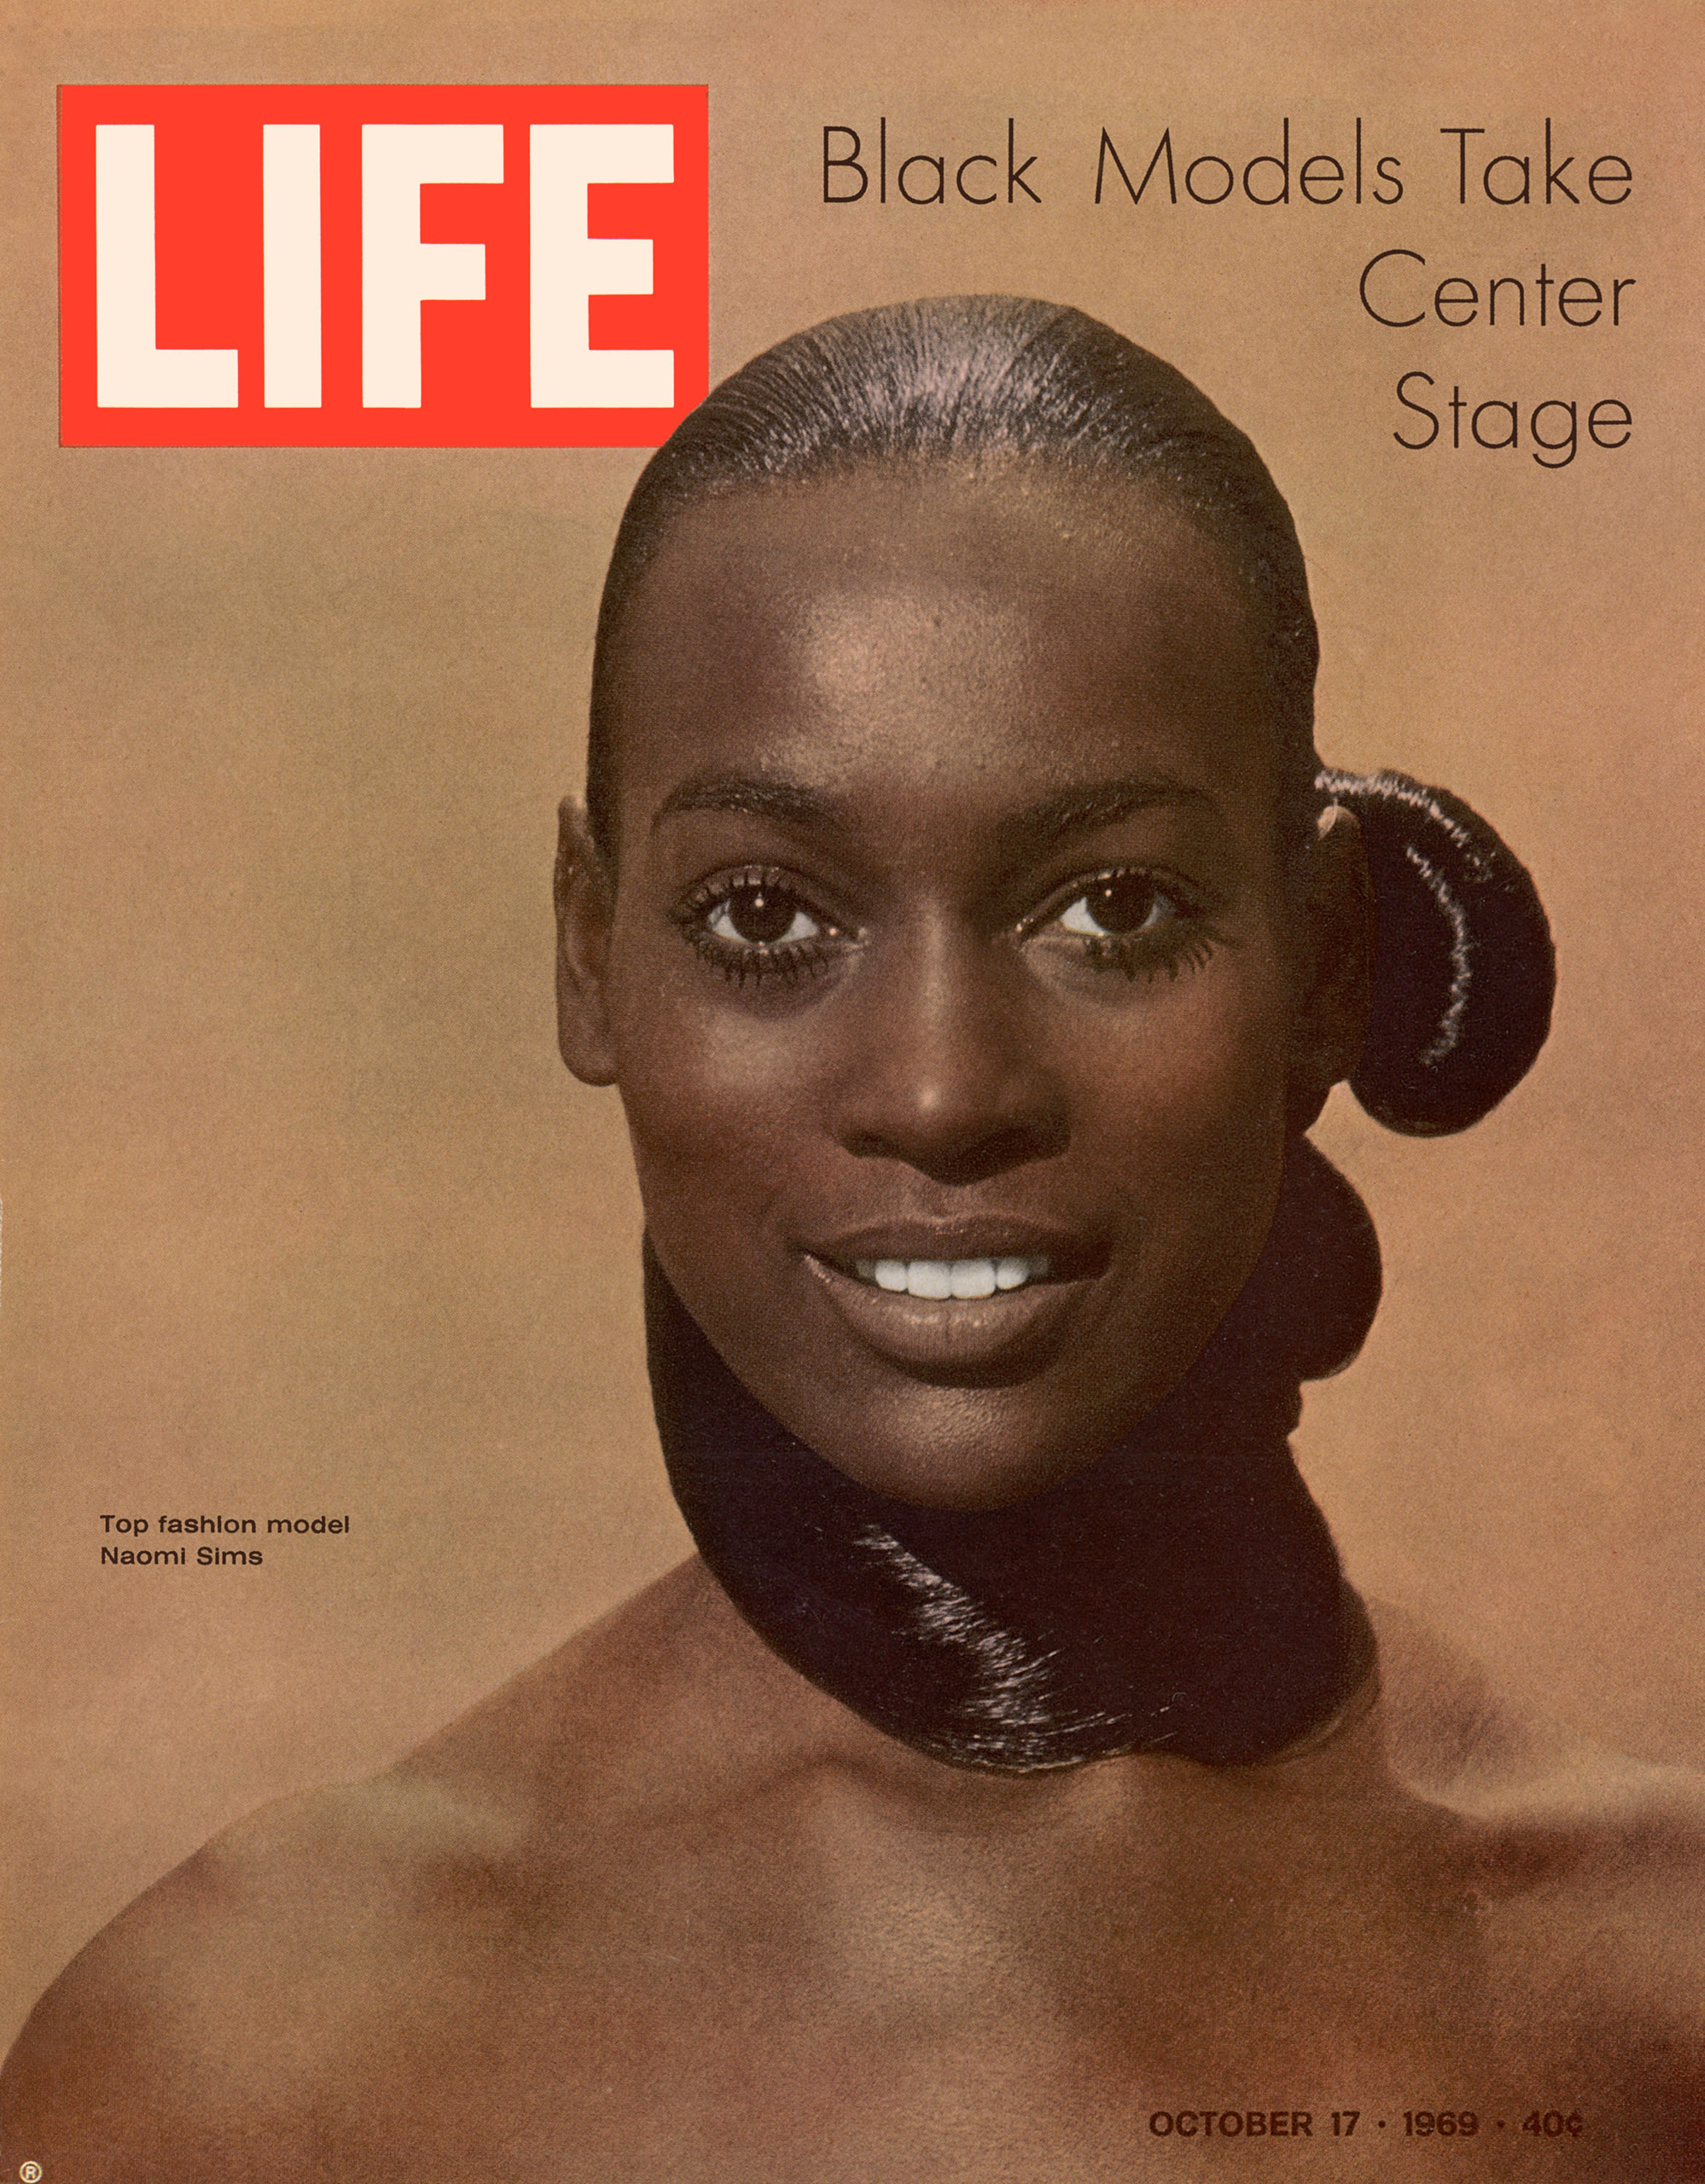 October 17, 1969 cover of LIFE magazine with Naomi Sims featured.